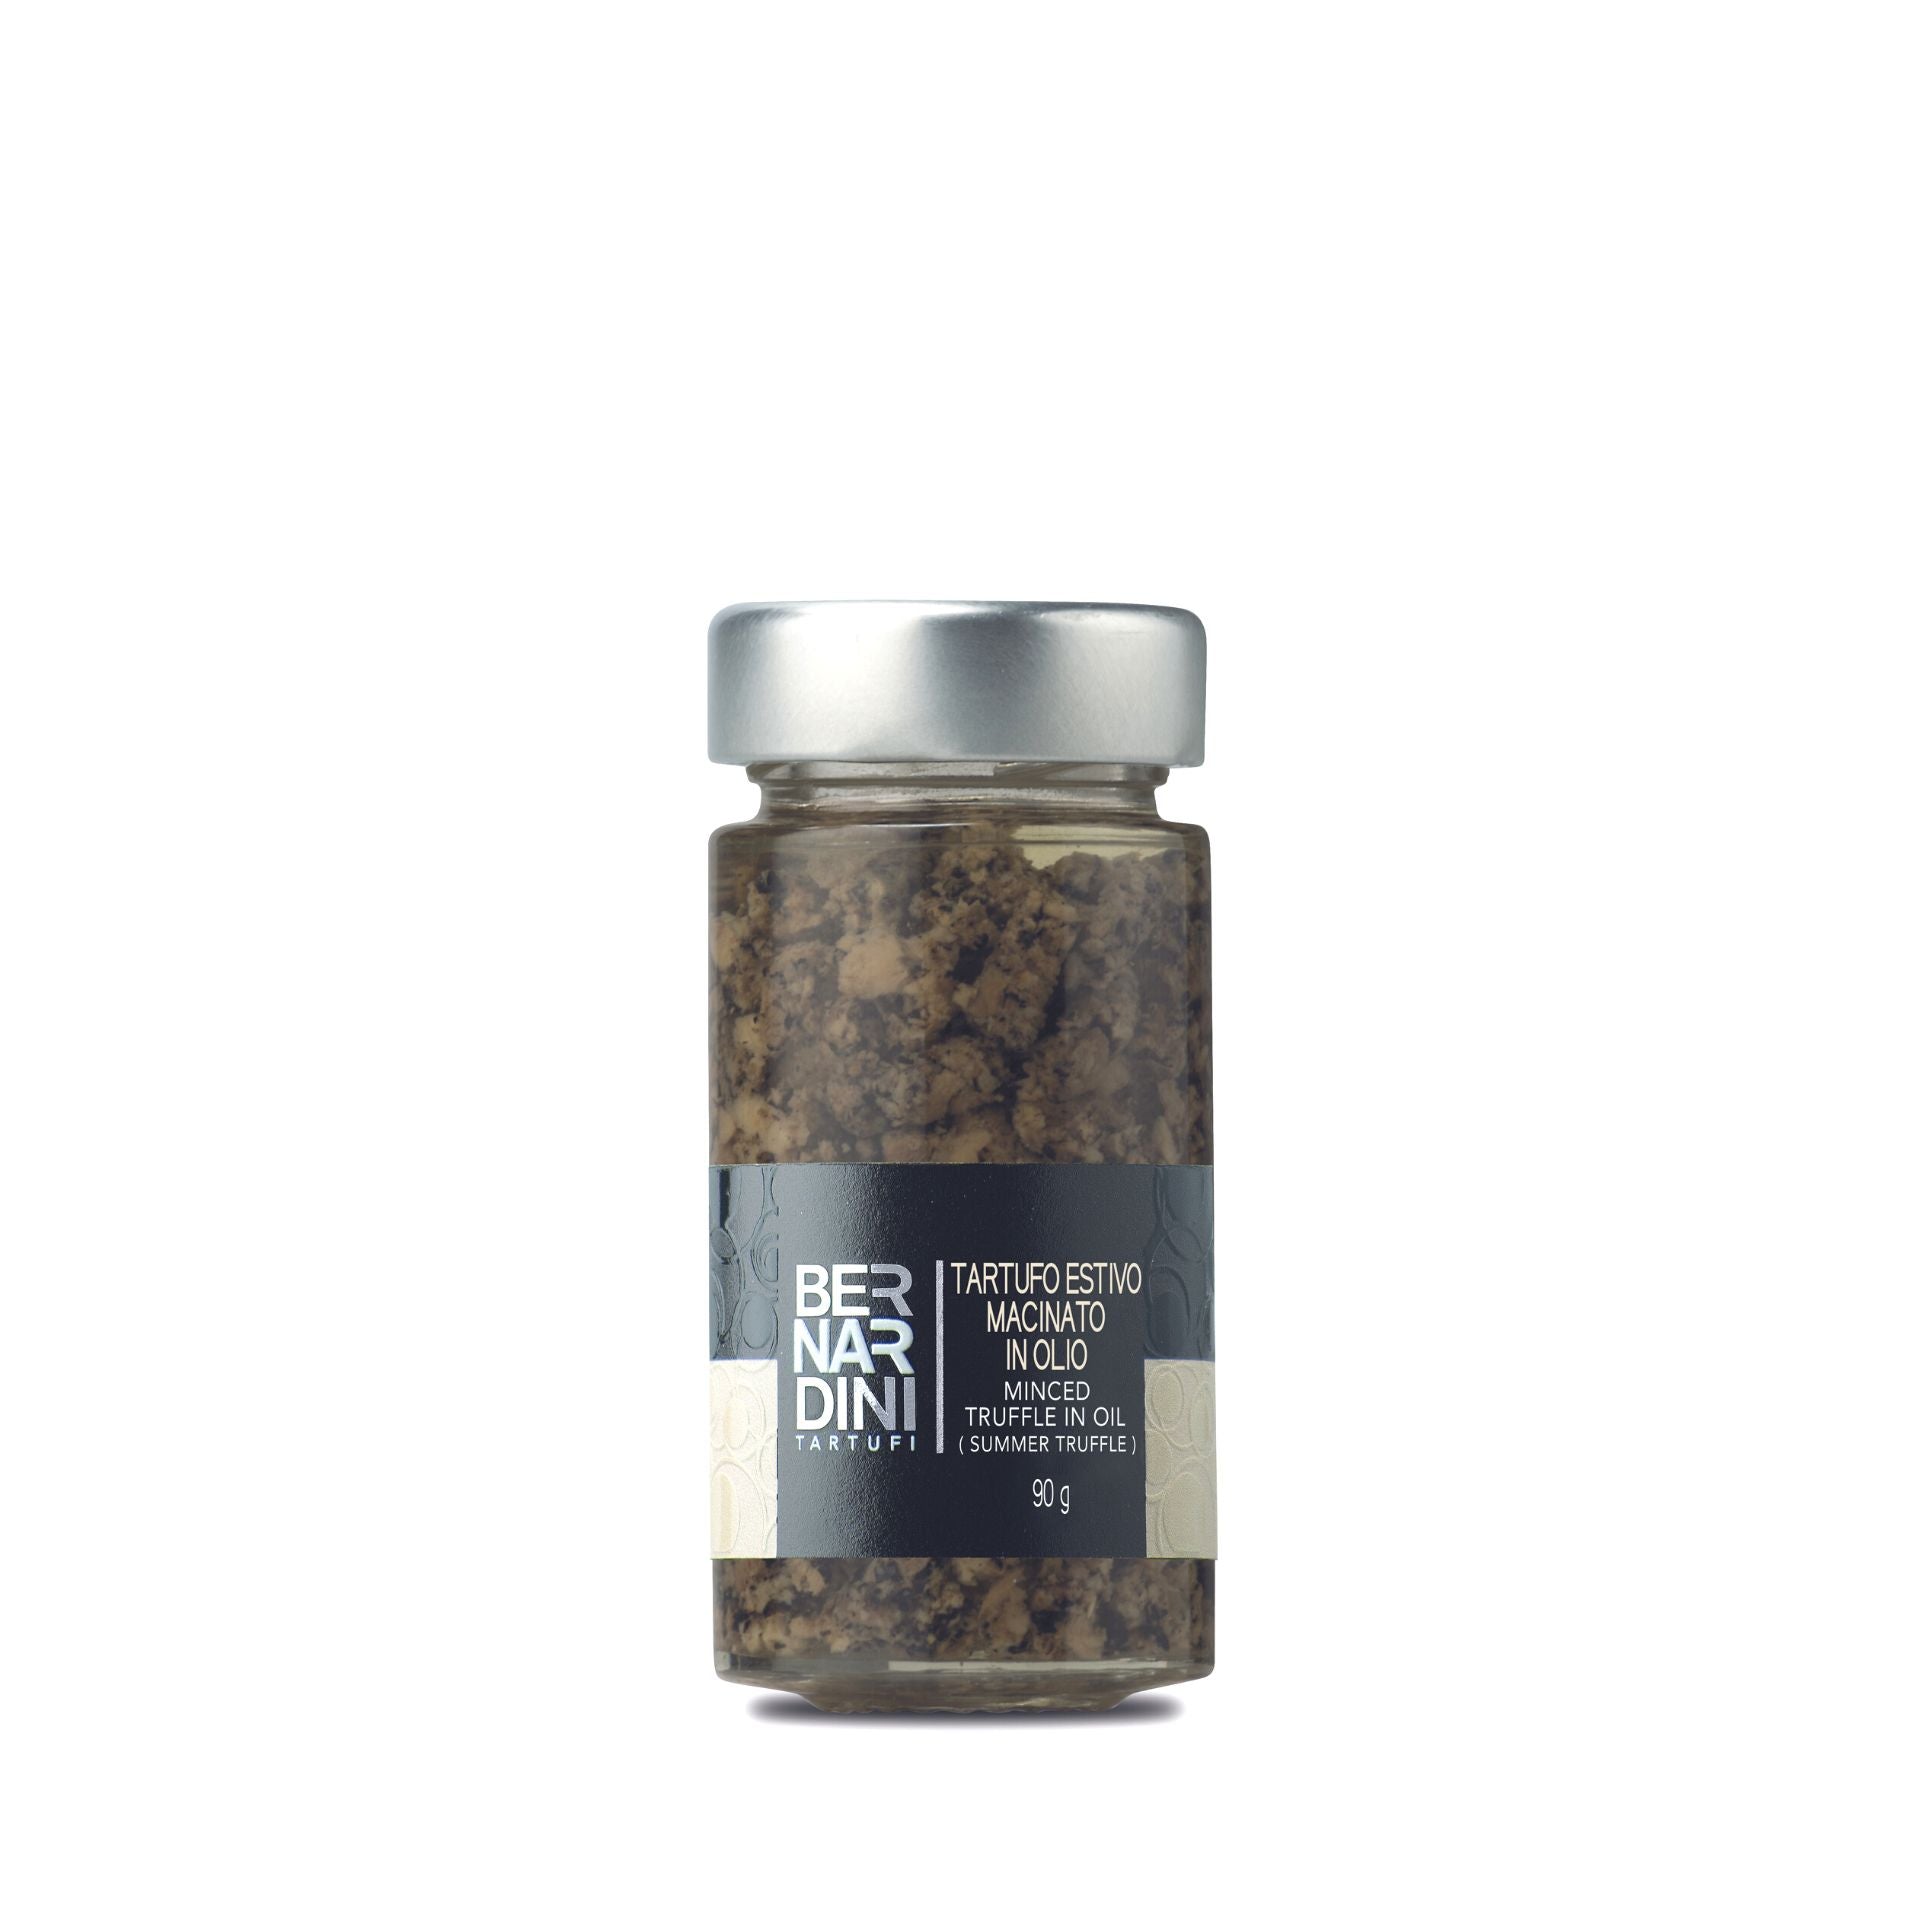 Bernardini Tartufi Minced Truffle in Oil 90g  | Imported and distributed in the UK by Just Gourmet Foods